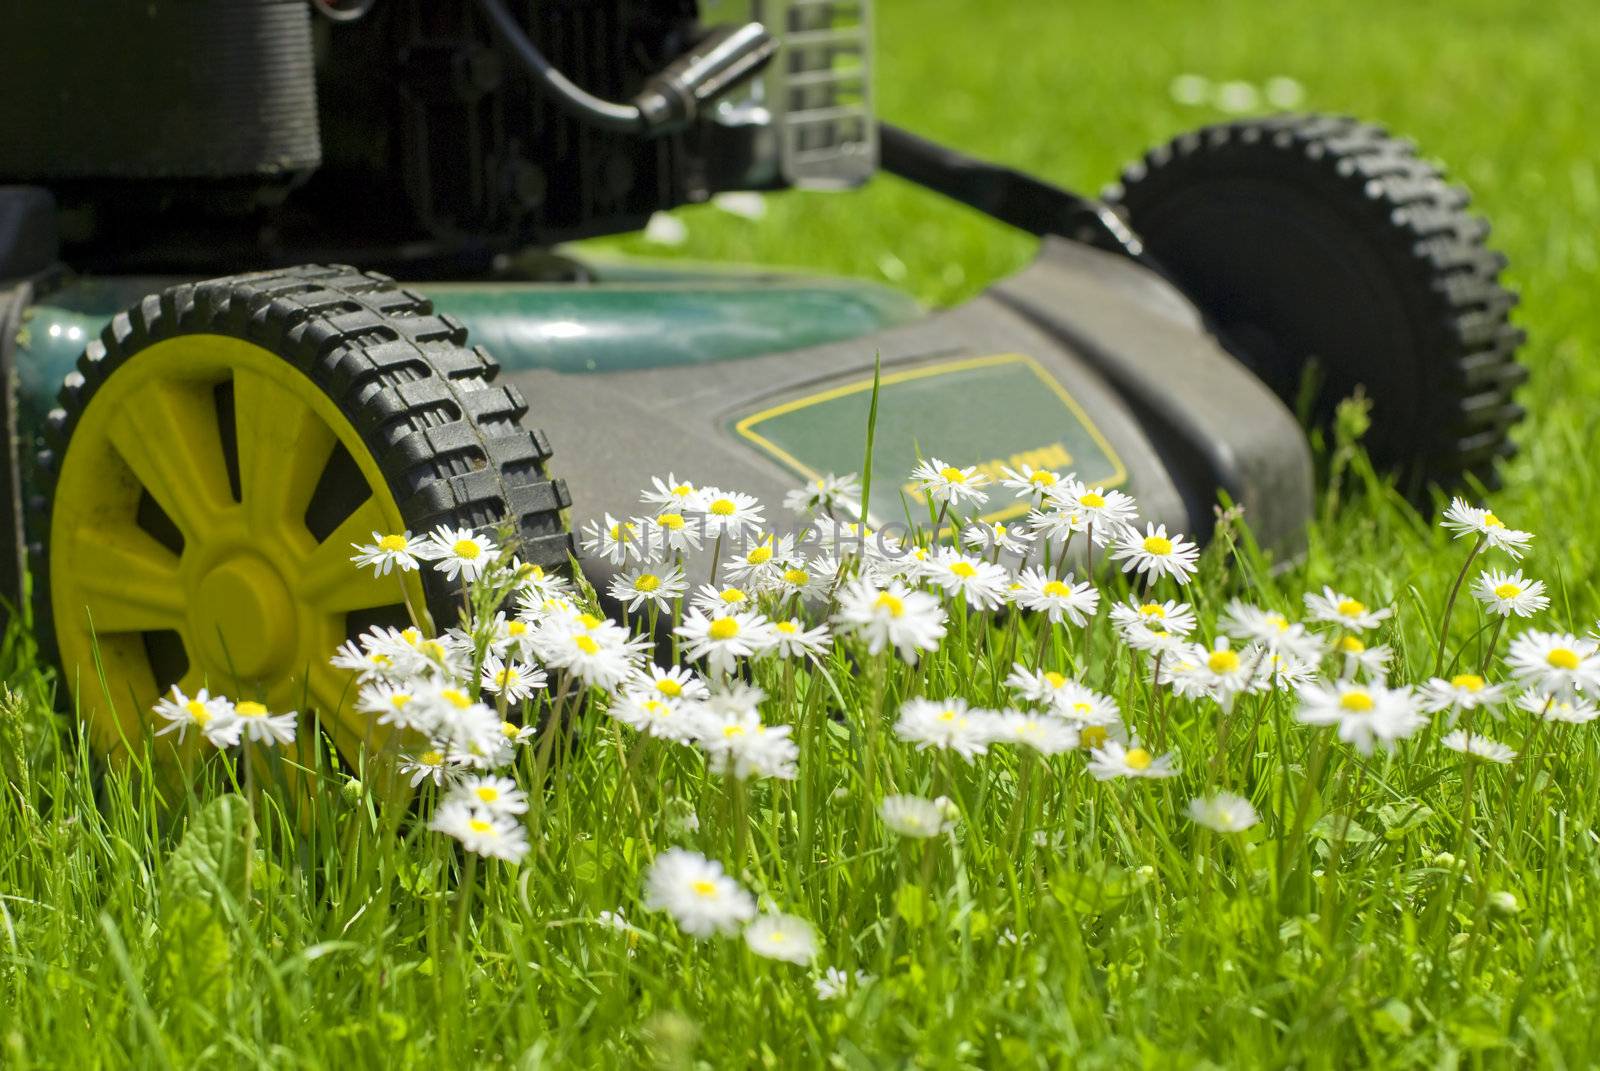 a lawnmover surrounded by flowers in the lawn